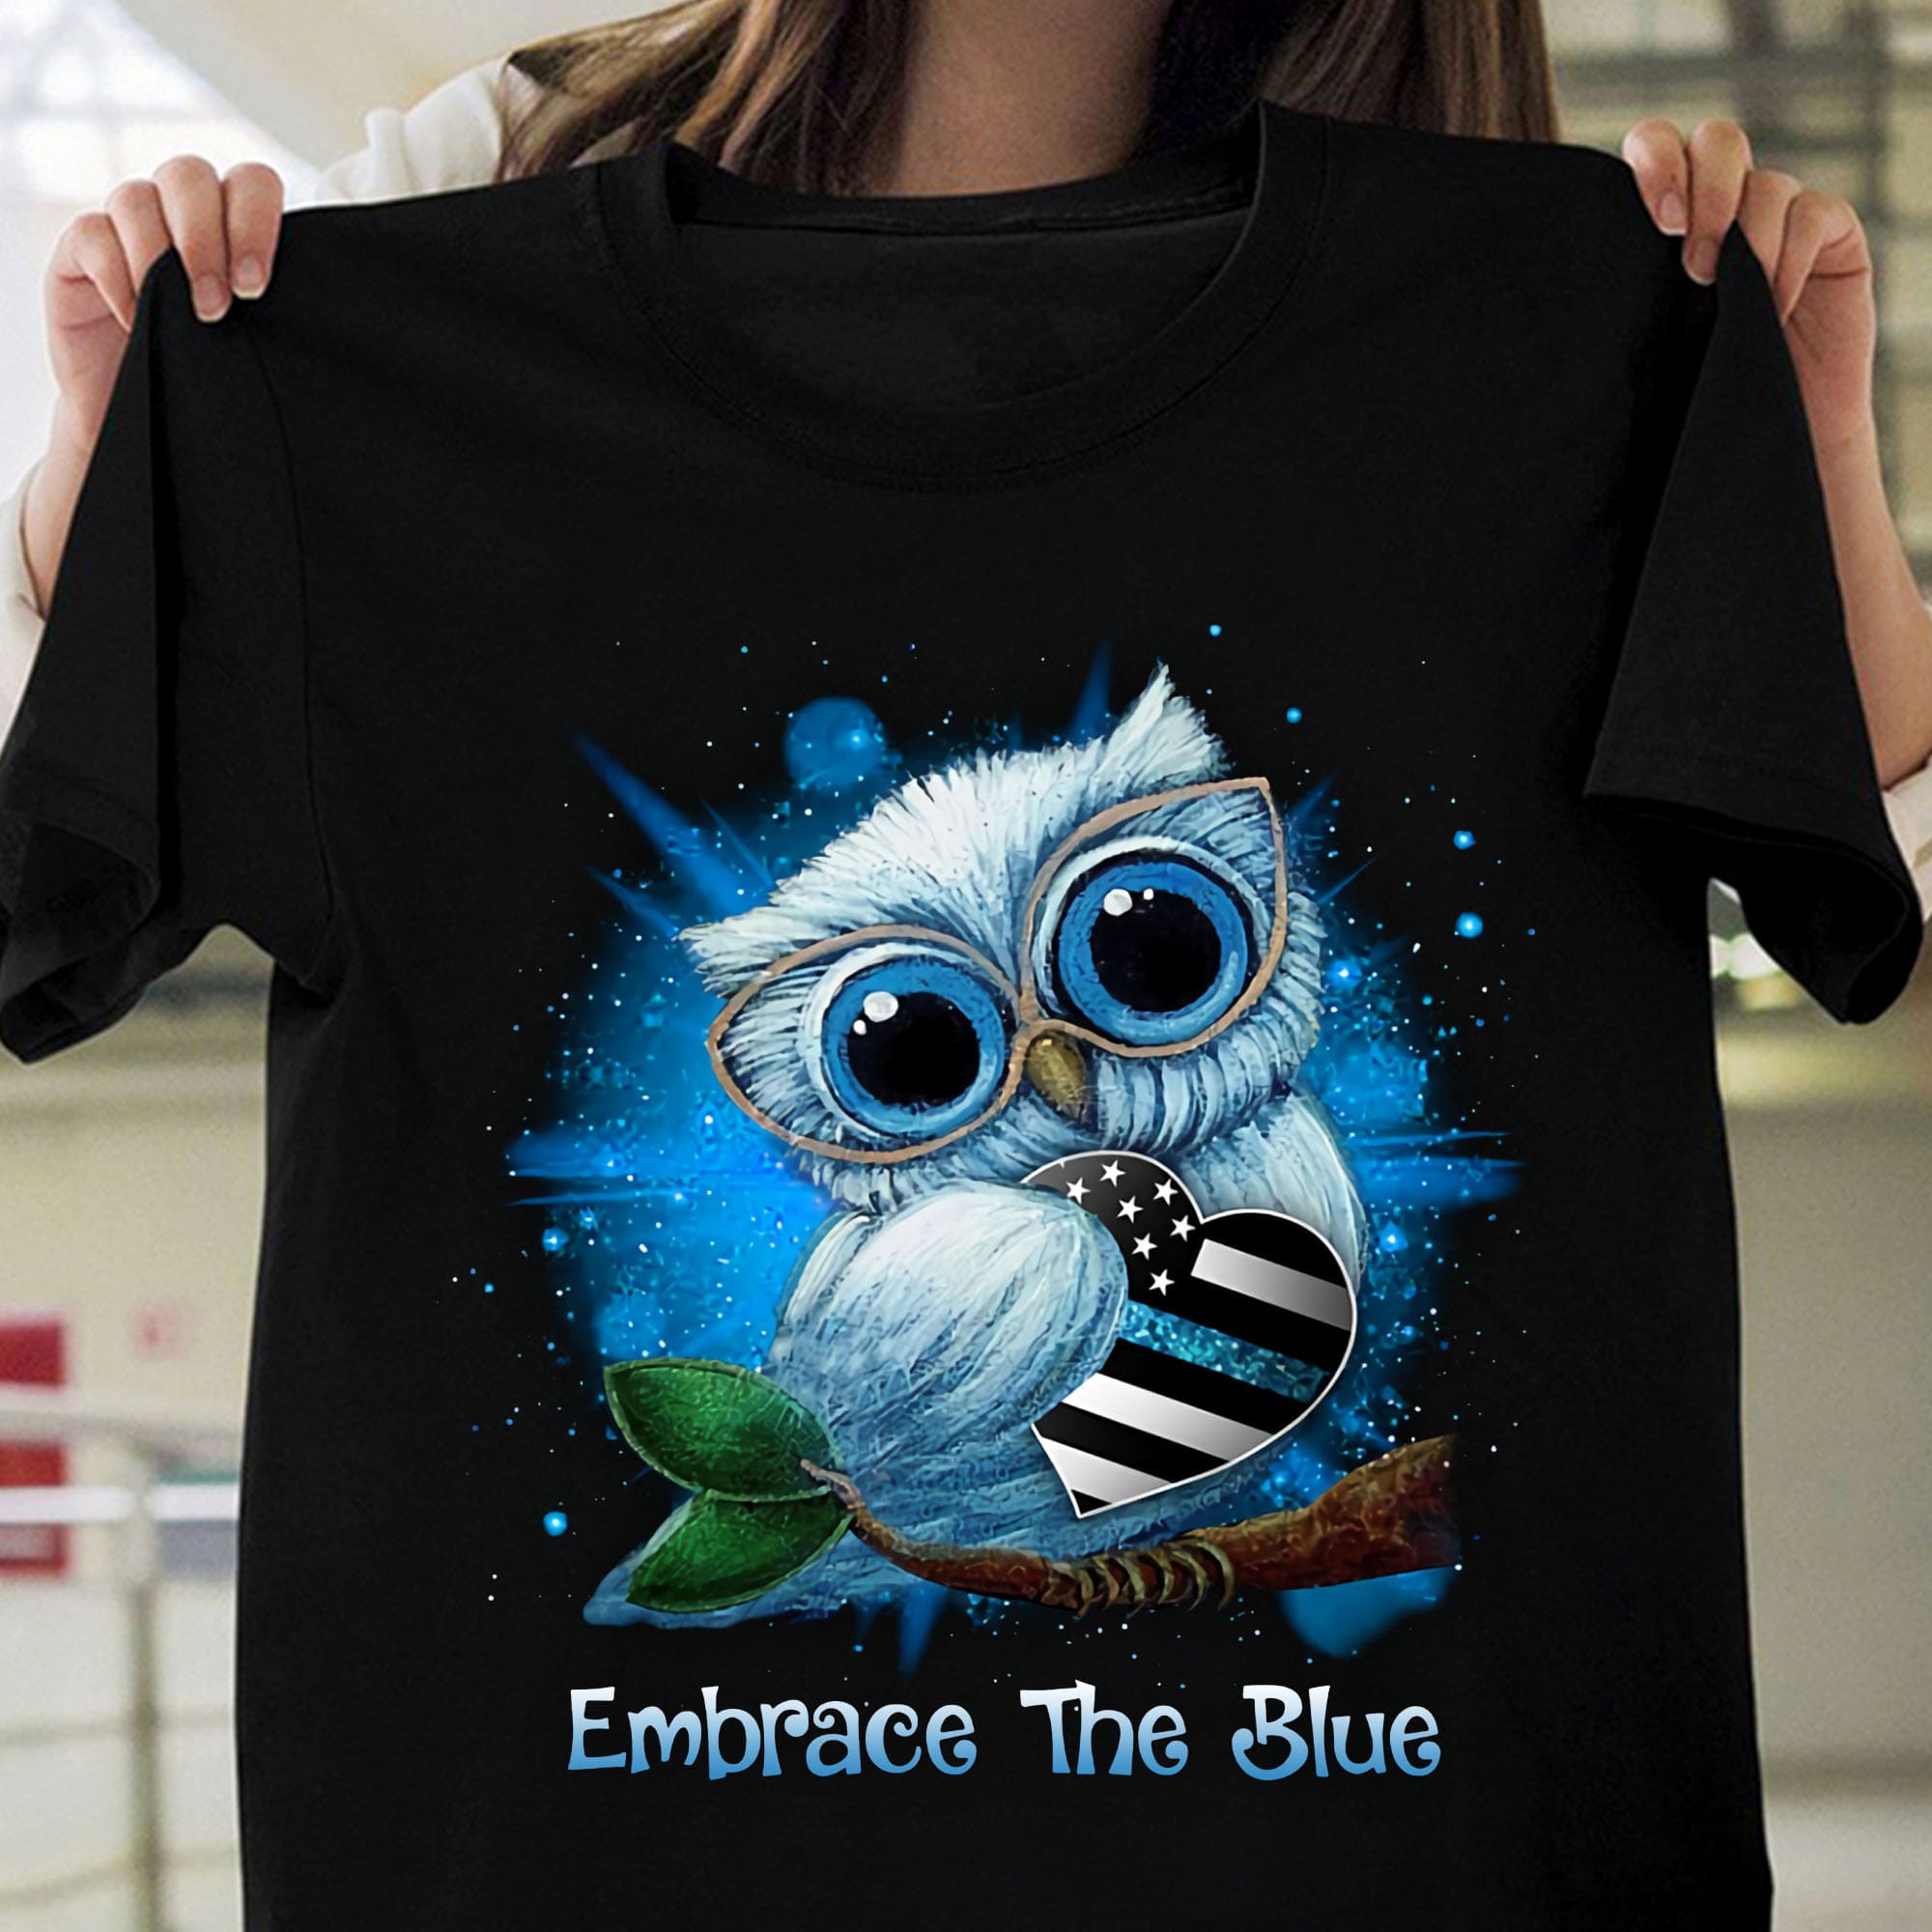 Embrace the blue - Save our police, American Police T-shirt